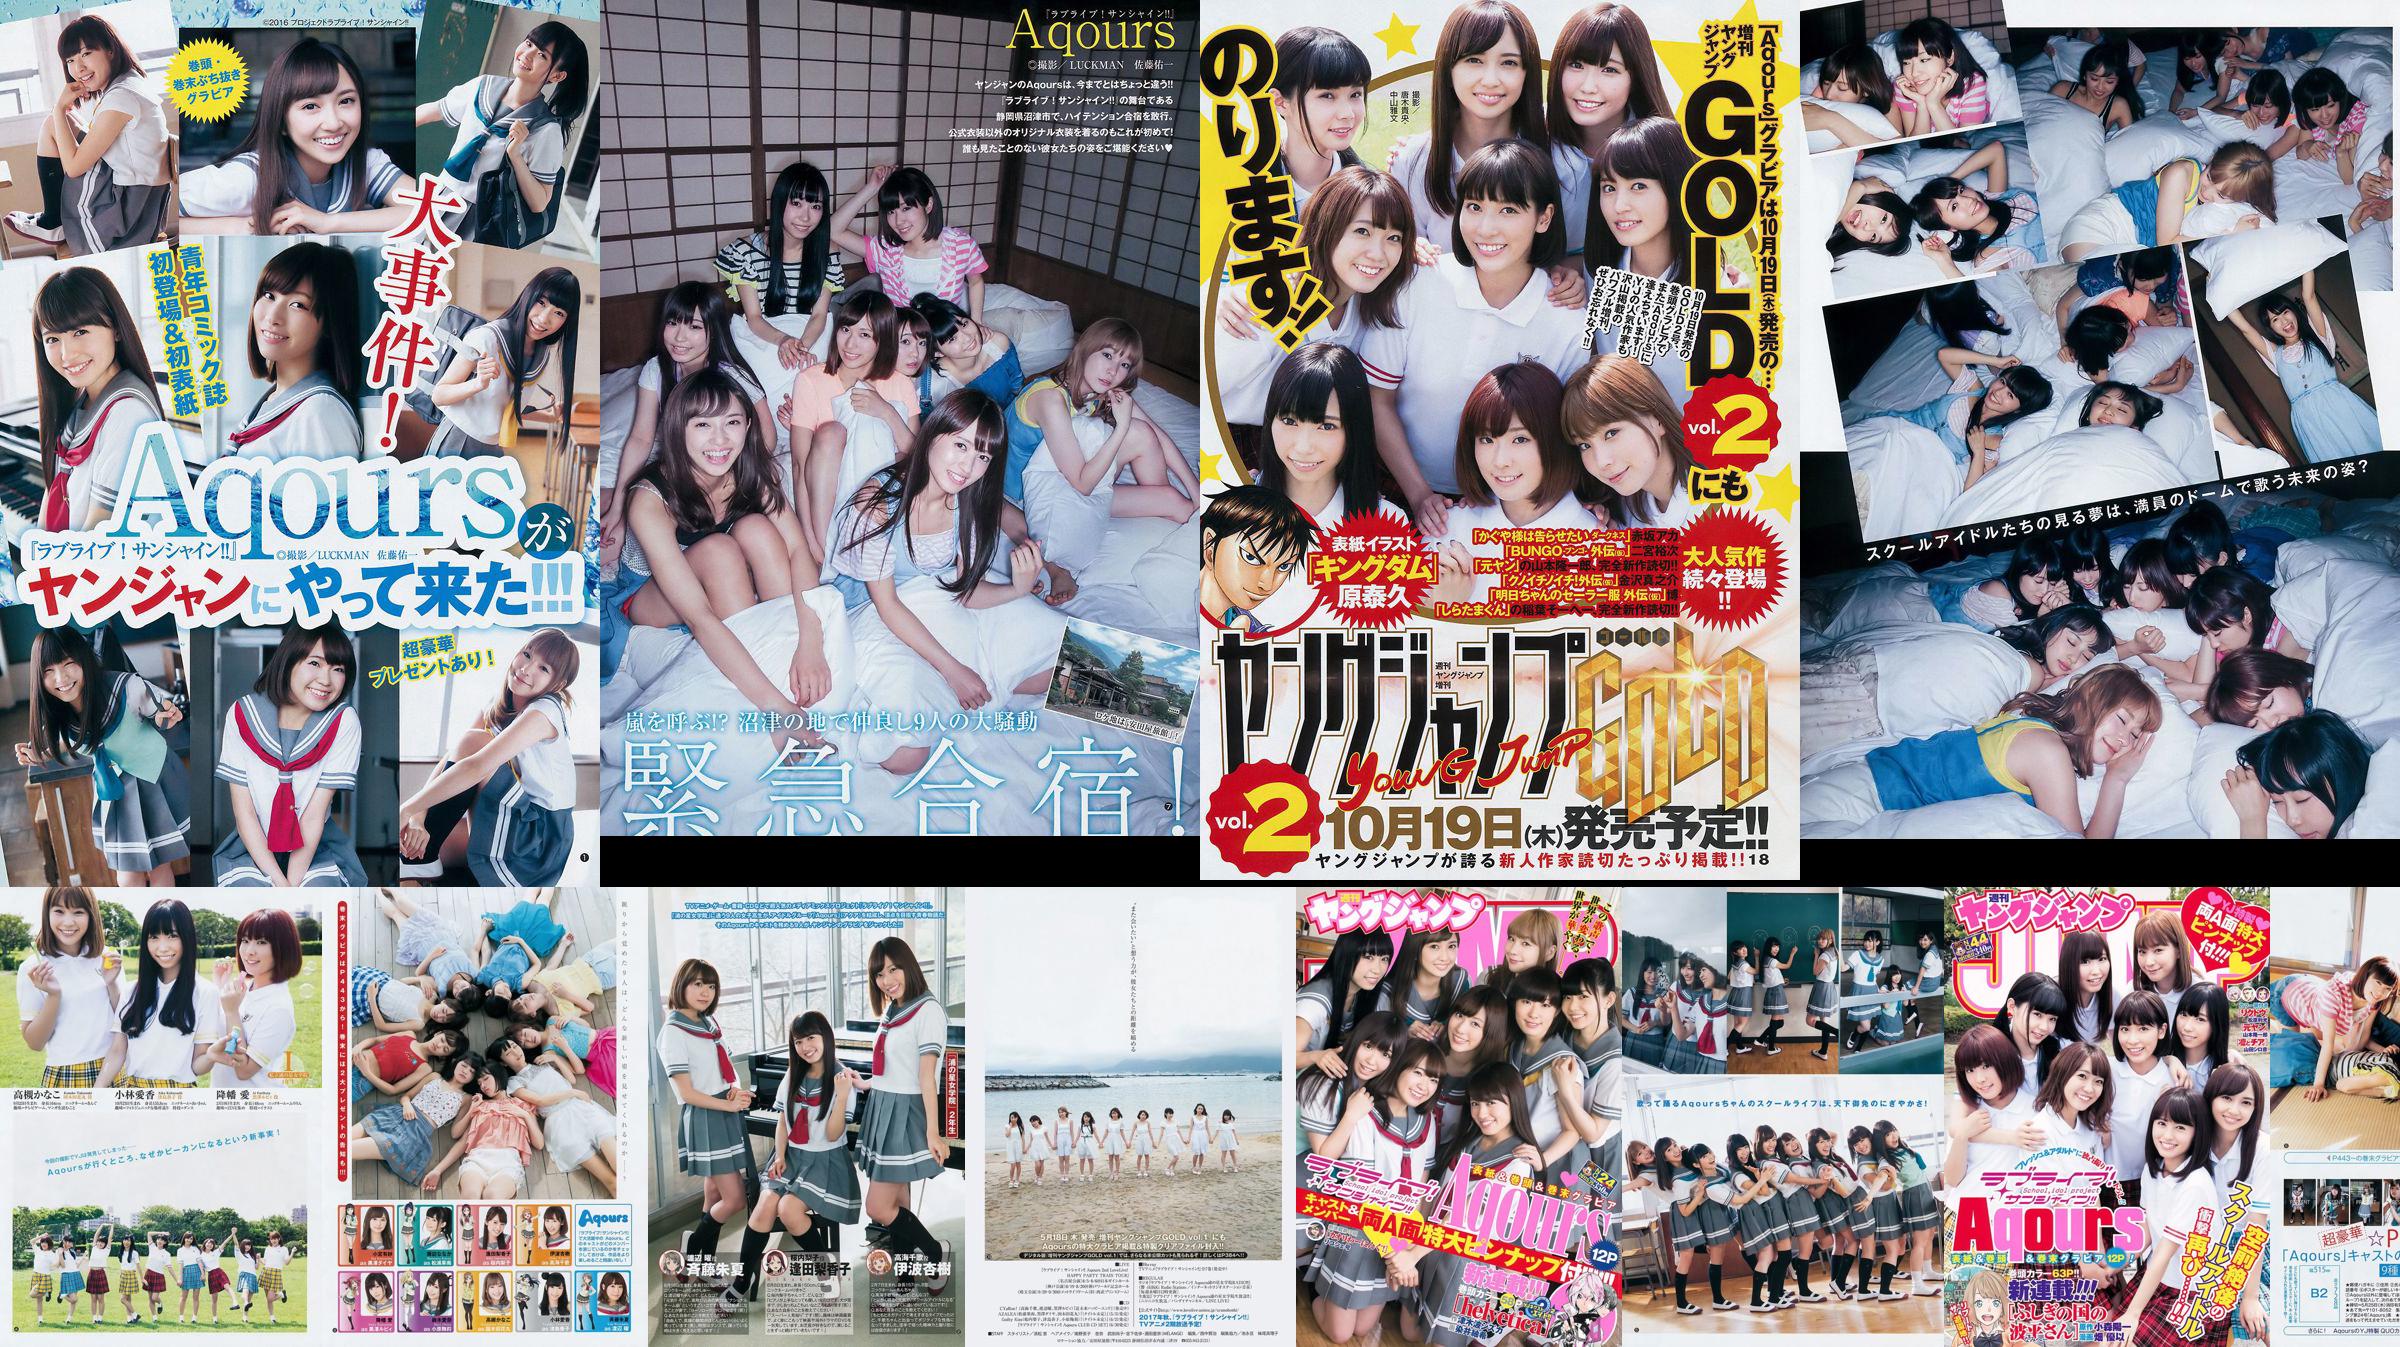 Japan Combination Aqours [Weekly Young Jump] Magazine photo n ° 44 2017 No.6ea6b5 Page 3